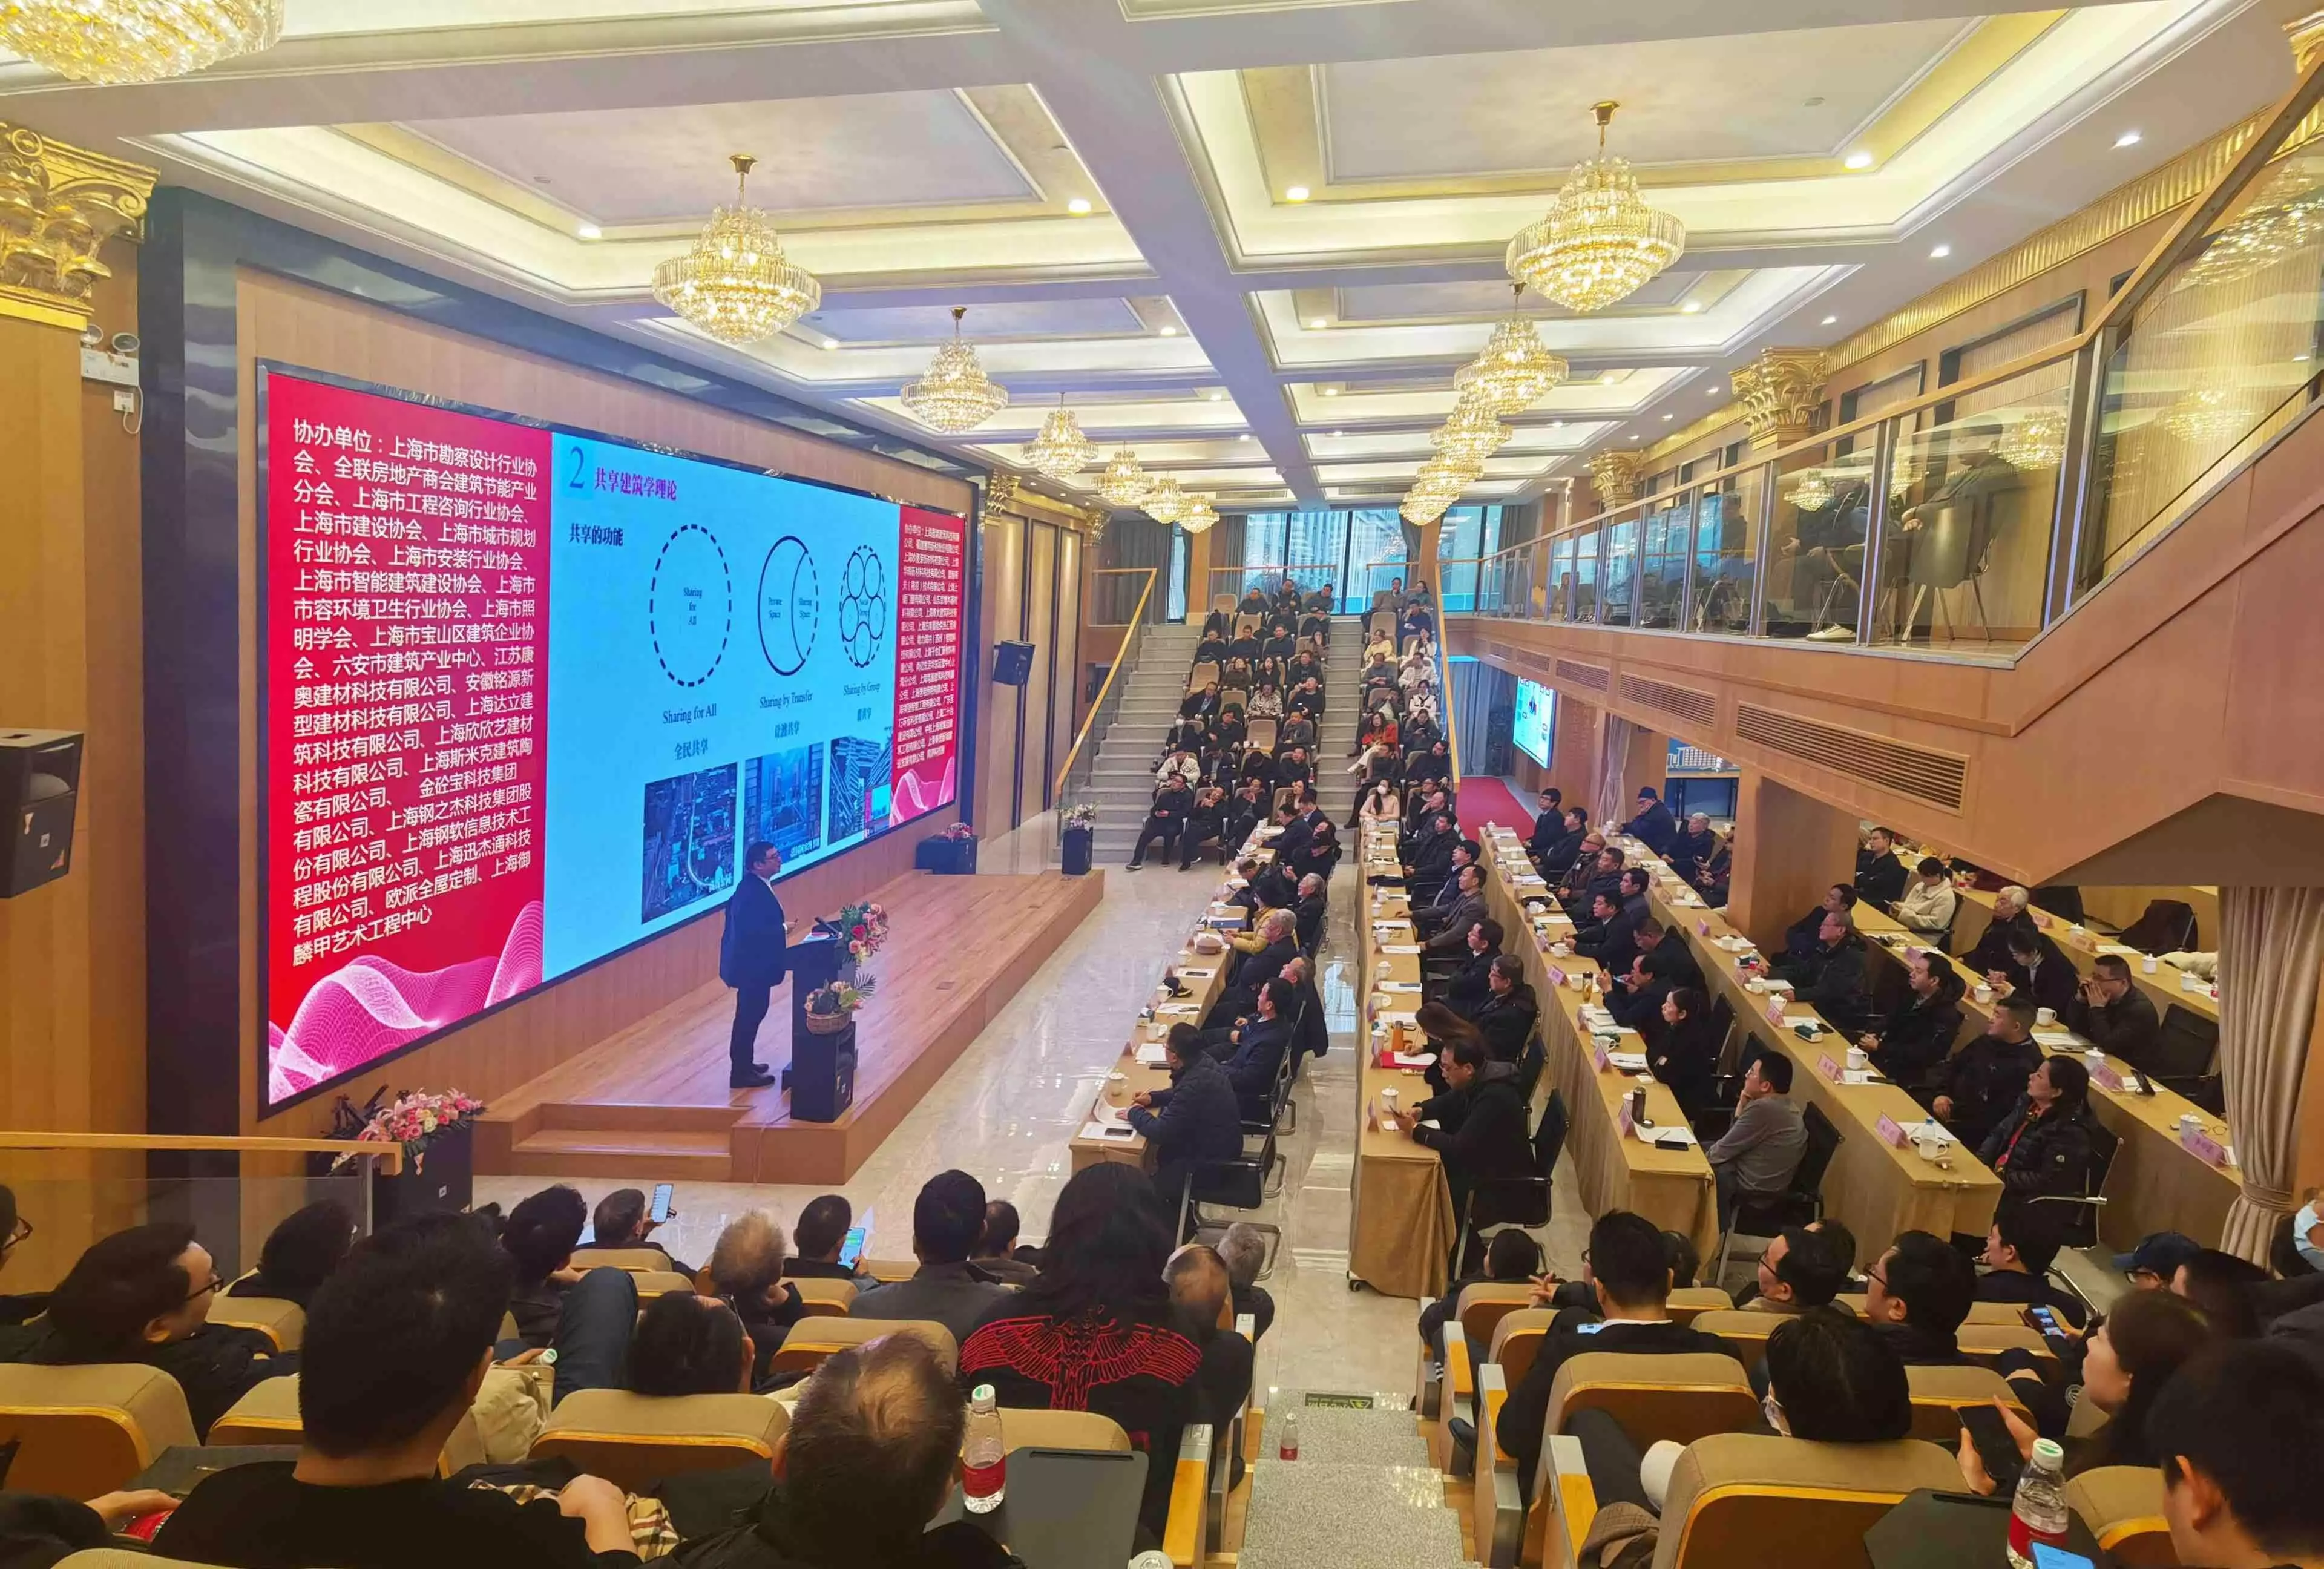 The 3rd Shanghai Modern Architectural Science and Technology Industrialization Forum was held